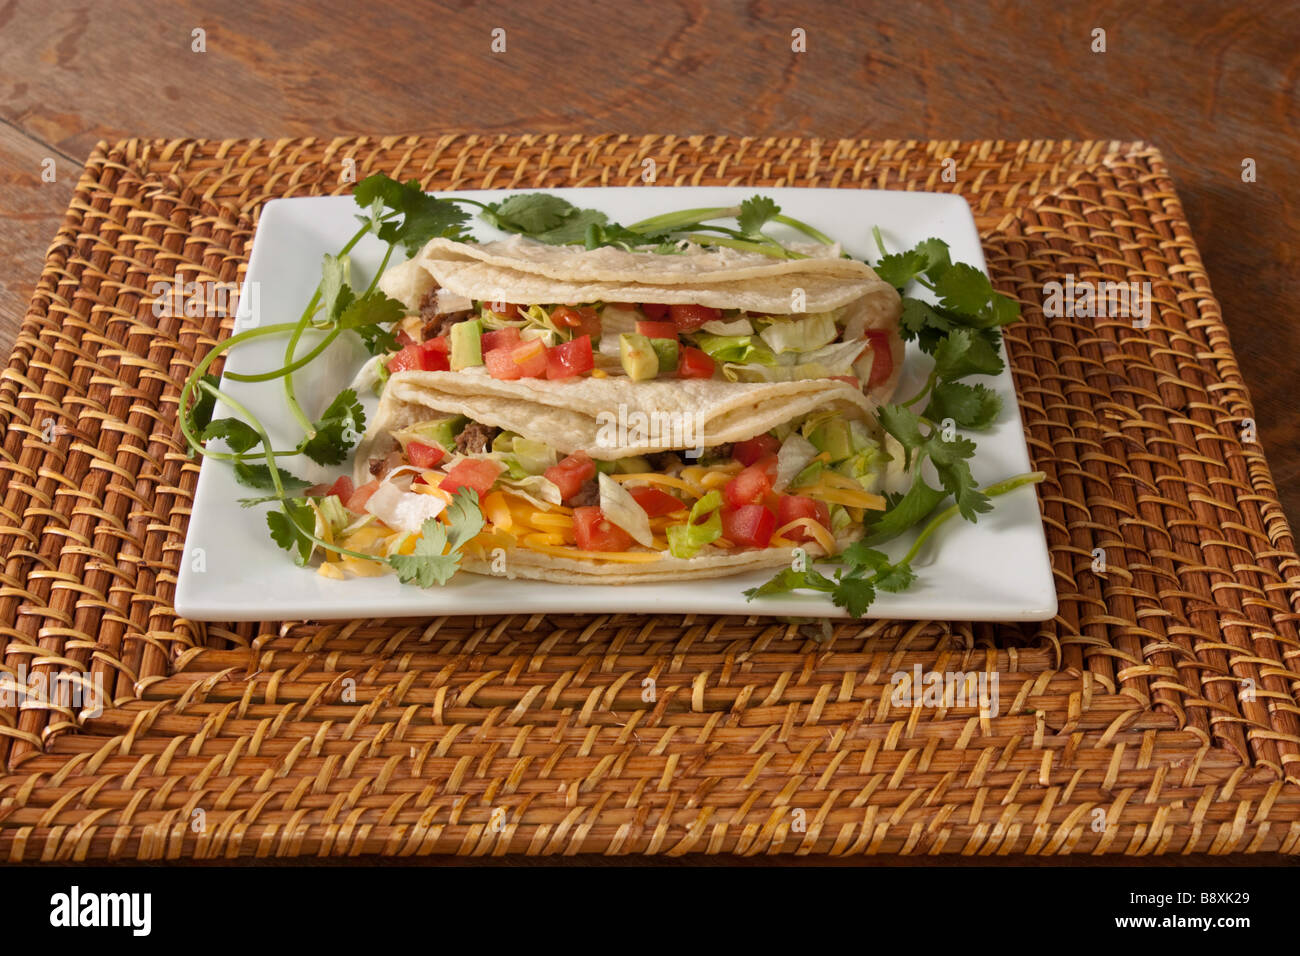 A plate of traditional style soft tacos on a bamboo charger garnished with cilantro Stock Photo